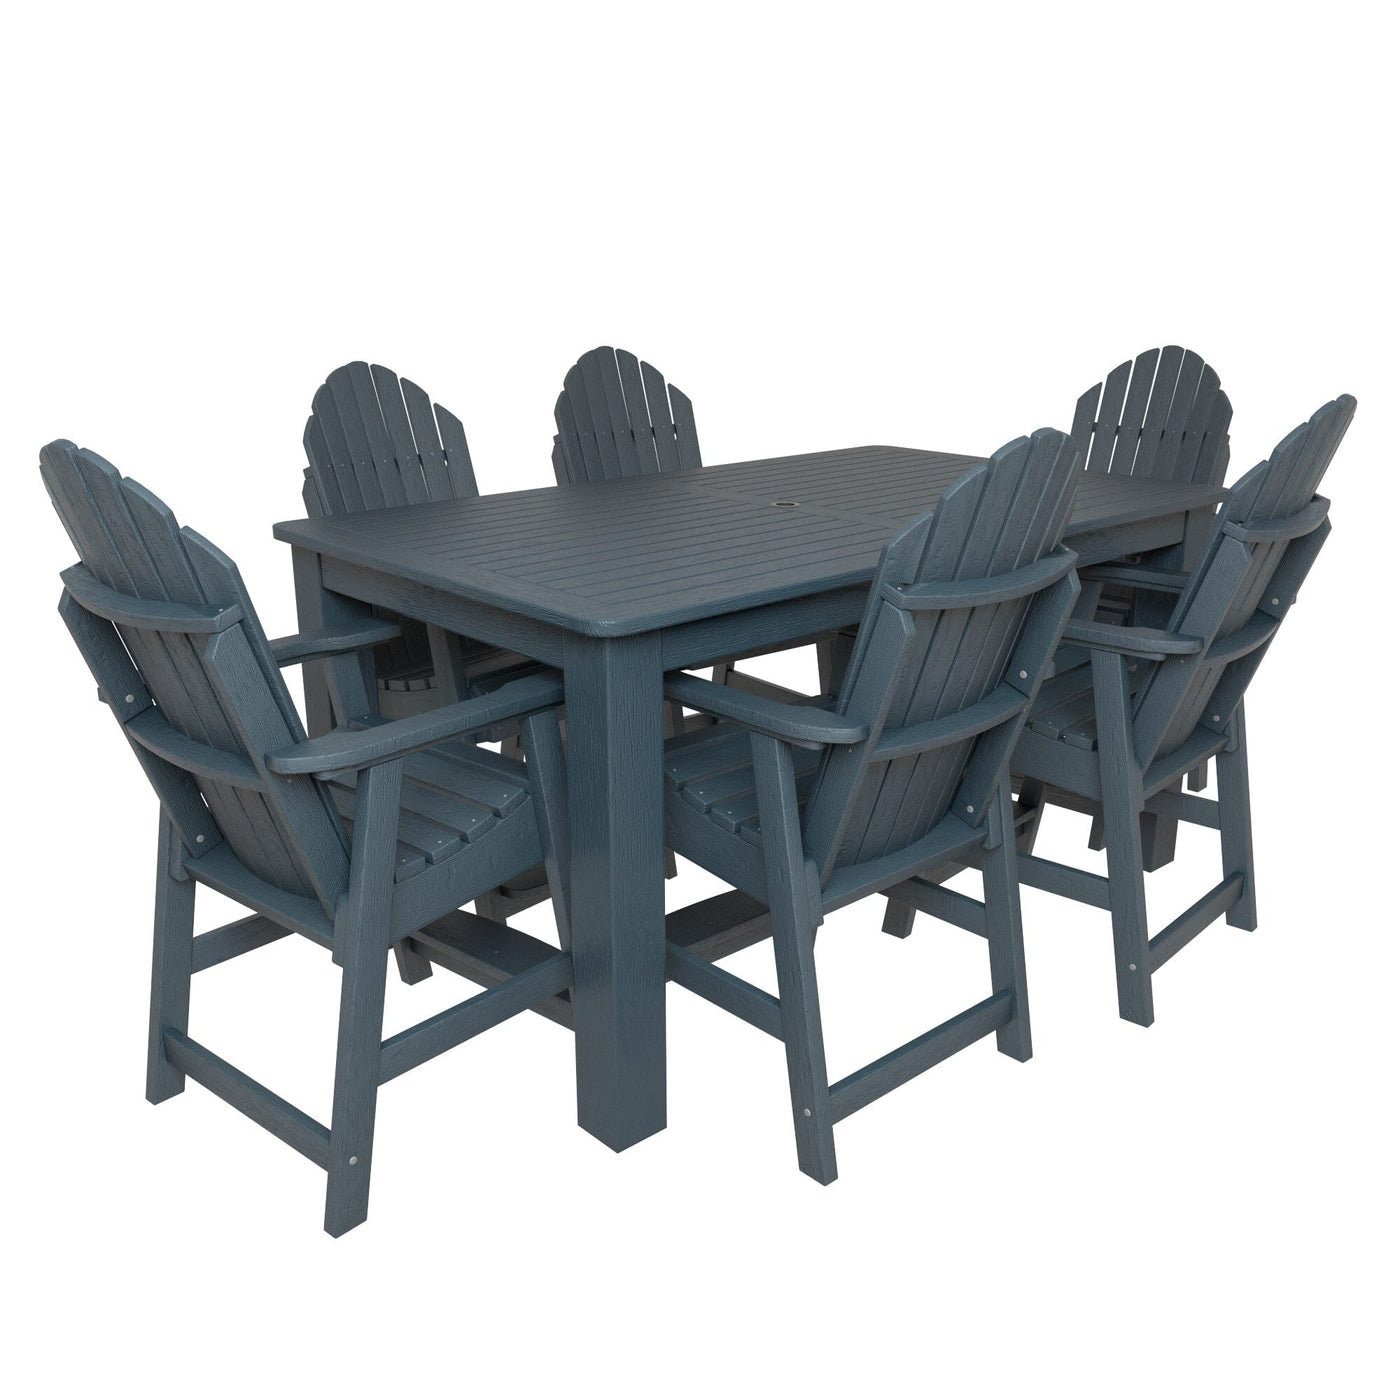 Hamilton 7pc Rectangular Outdoor Dining Set 42in x 72in - Counter Height Dining Highwood USA Nantucket Blue 